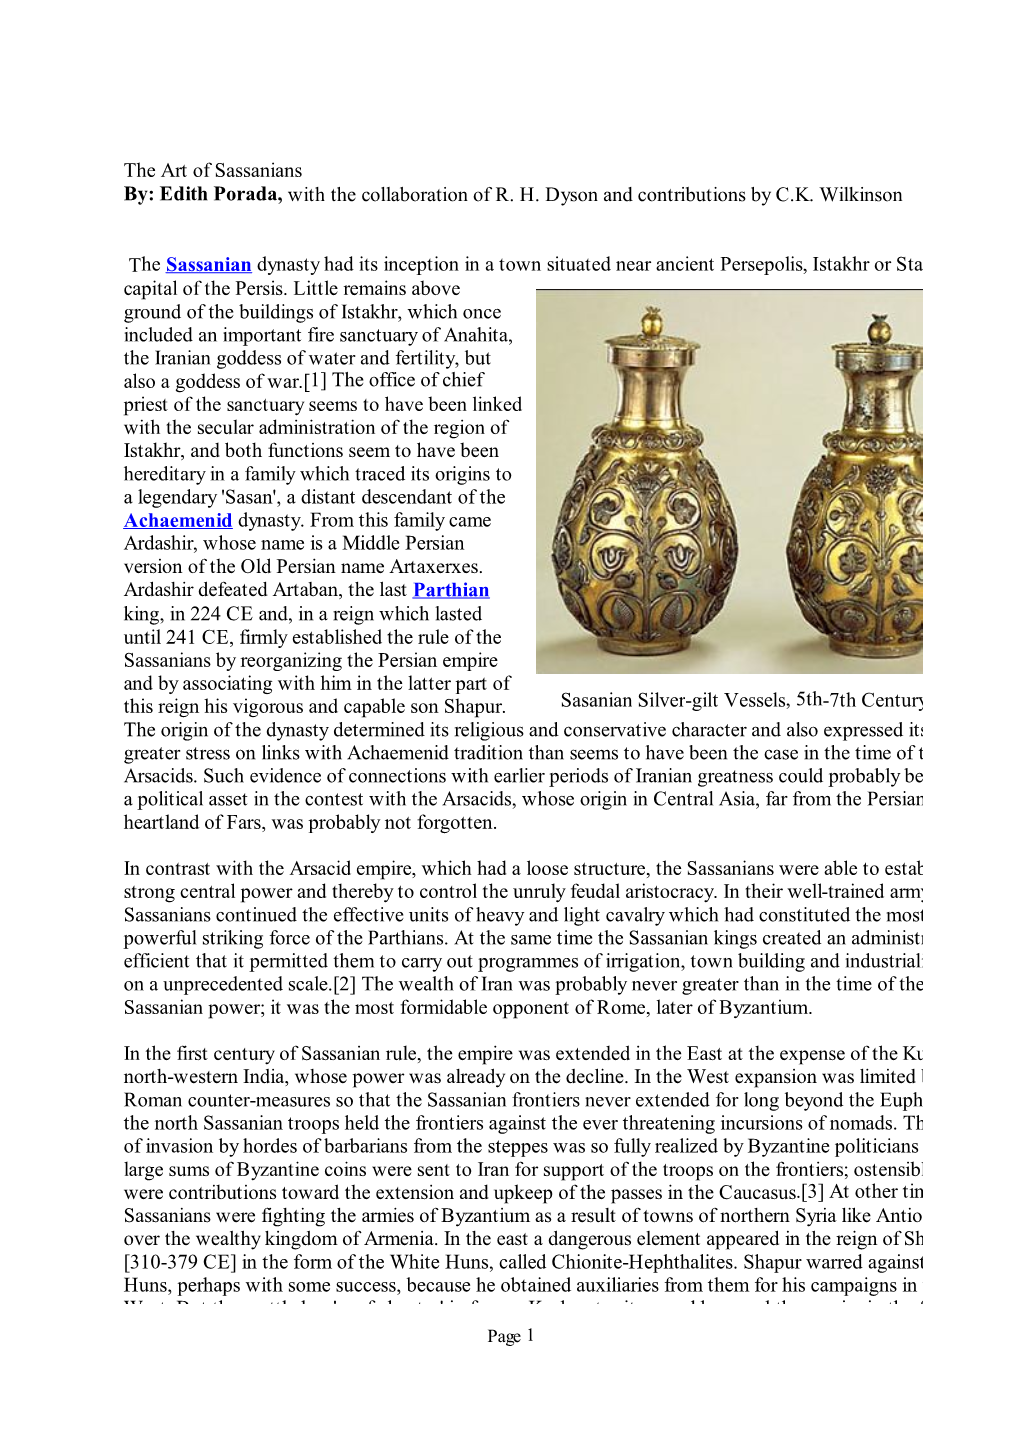 The Art of Sassanians By: Edith Porada, with the Collaboration of R. H. Dyson and Contributions by C.K. Wilkinson